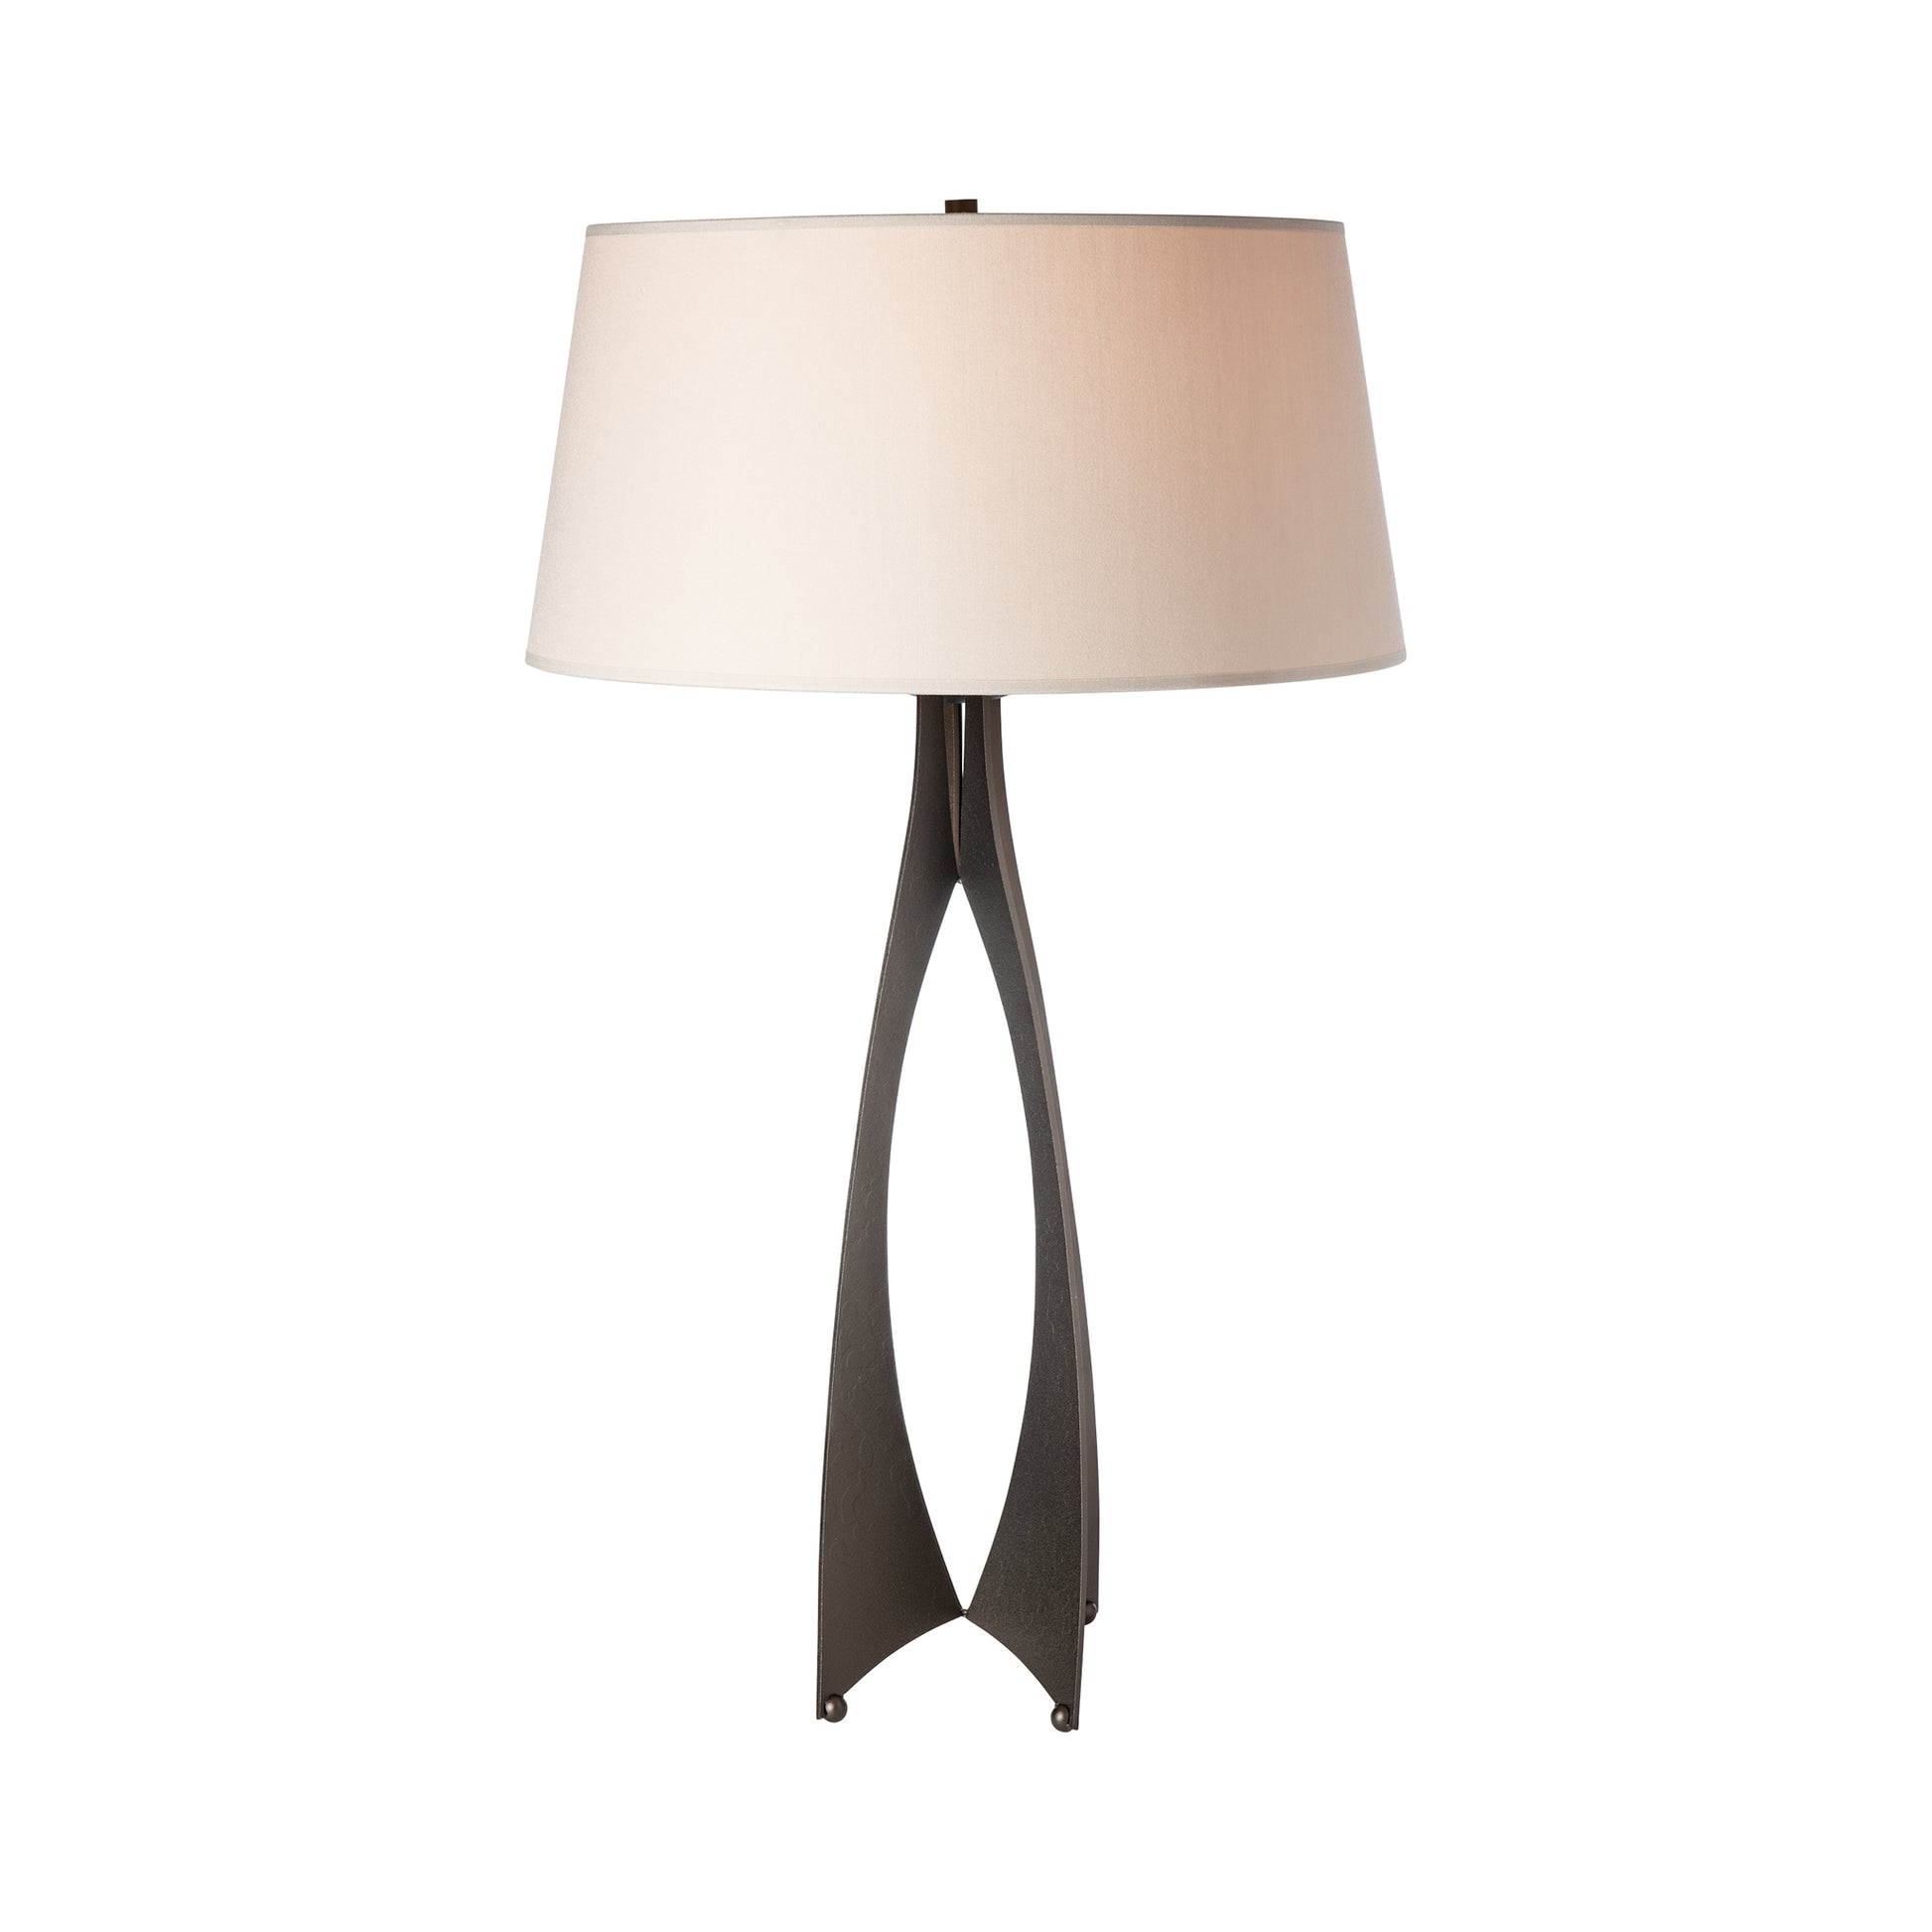 A Hubbardton Forge Moreau Table Lamp with a black base and a white shade.